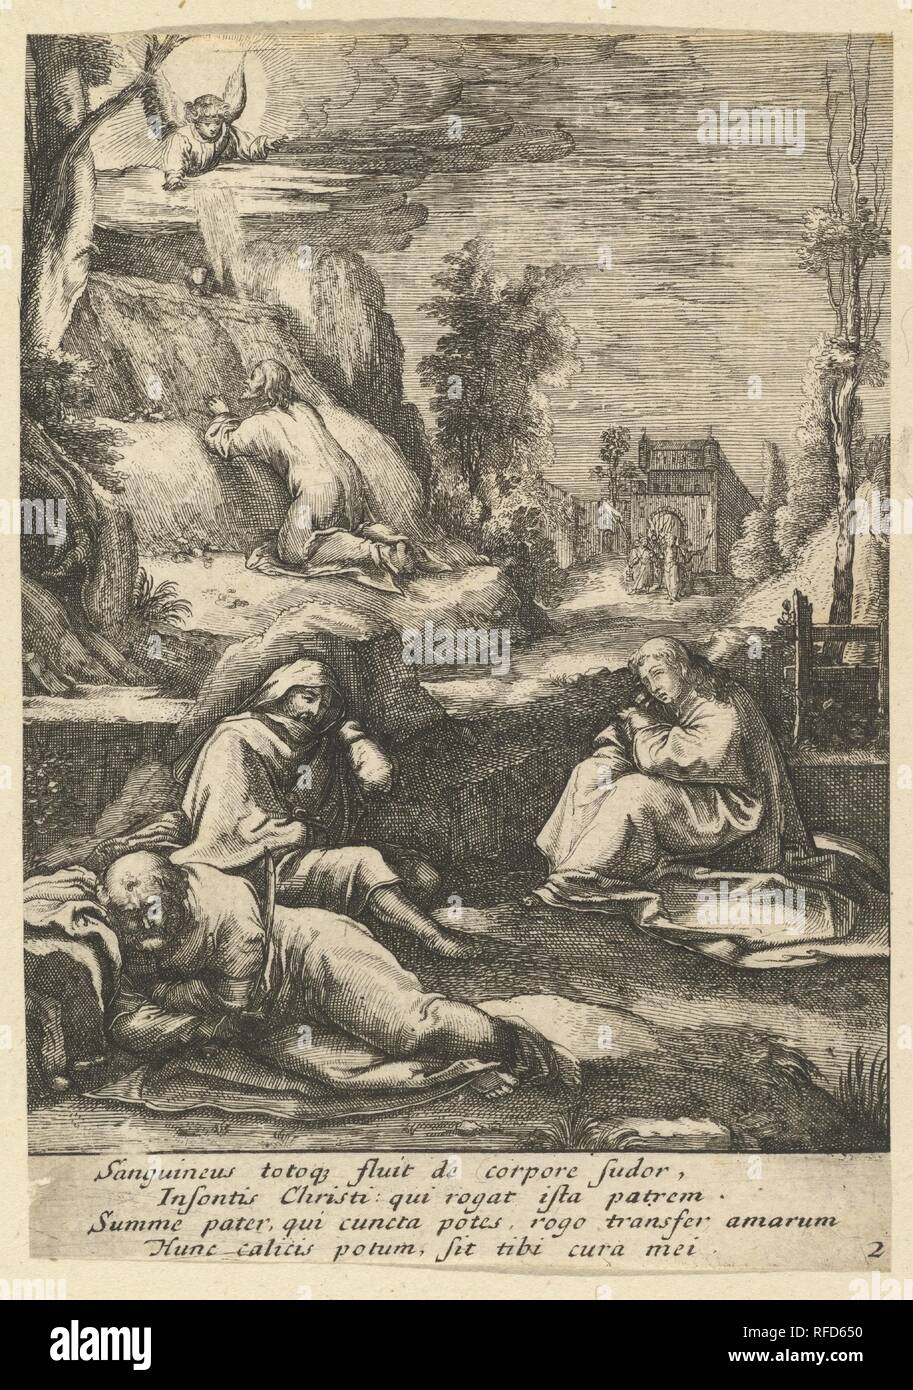 The Agony in the Garden, from The Passion of Christ. Artist: After Hendrick Goltzius (Netherlandish, Mühlbracht 1558-1617 Haarlem); Nicolas Cochin (French, Troyes 1610-1686 Paris). Dimensions: Sheet: 5 3/8 × 3 3/4 in. (13.6 × 9.6 cm). Publisher: Jean I Leblond (French, ca. 1590-1666 Paris). Date: mid 17th century. Museum: Metropolitan Museum of Art, New York, USA. Stock Photo